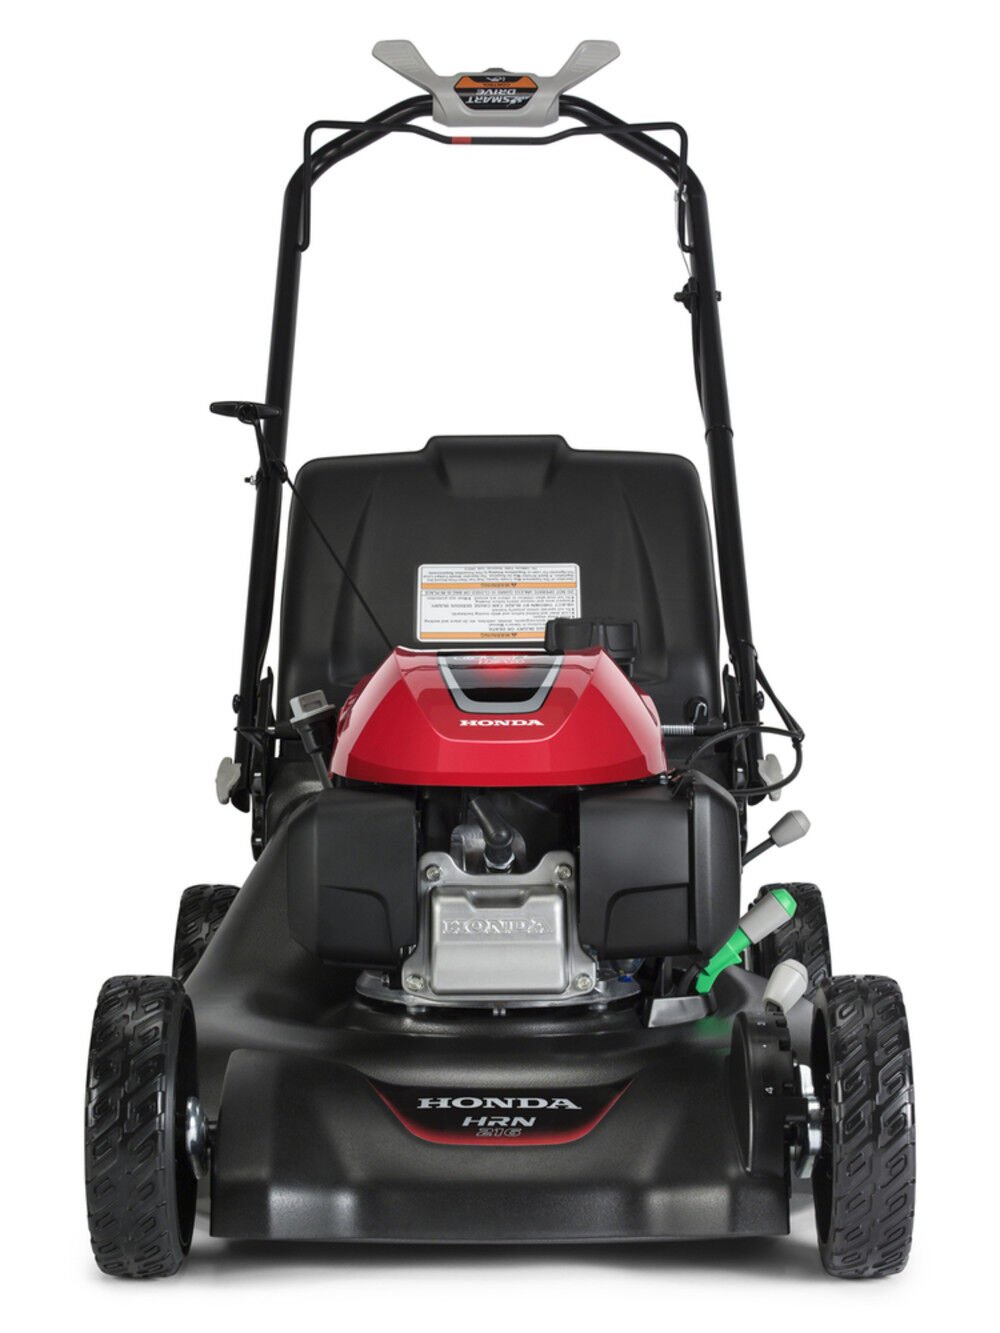 Honda 21 In. Steel Deck Self Propelled 3-in-1 Lawn Mower with GCV170 Engine Auto Choke and Smart Drive